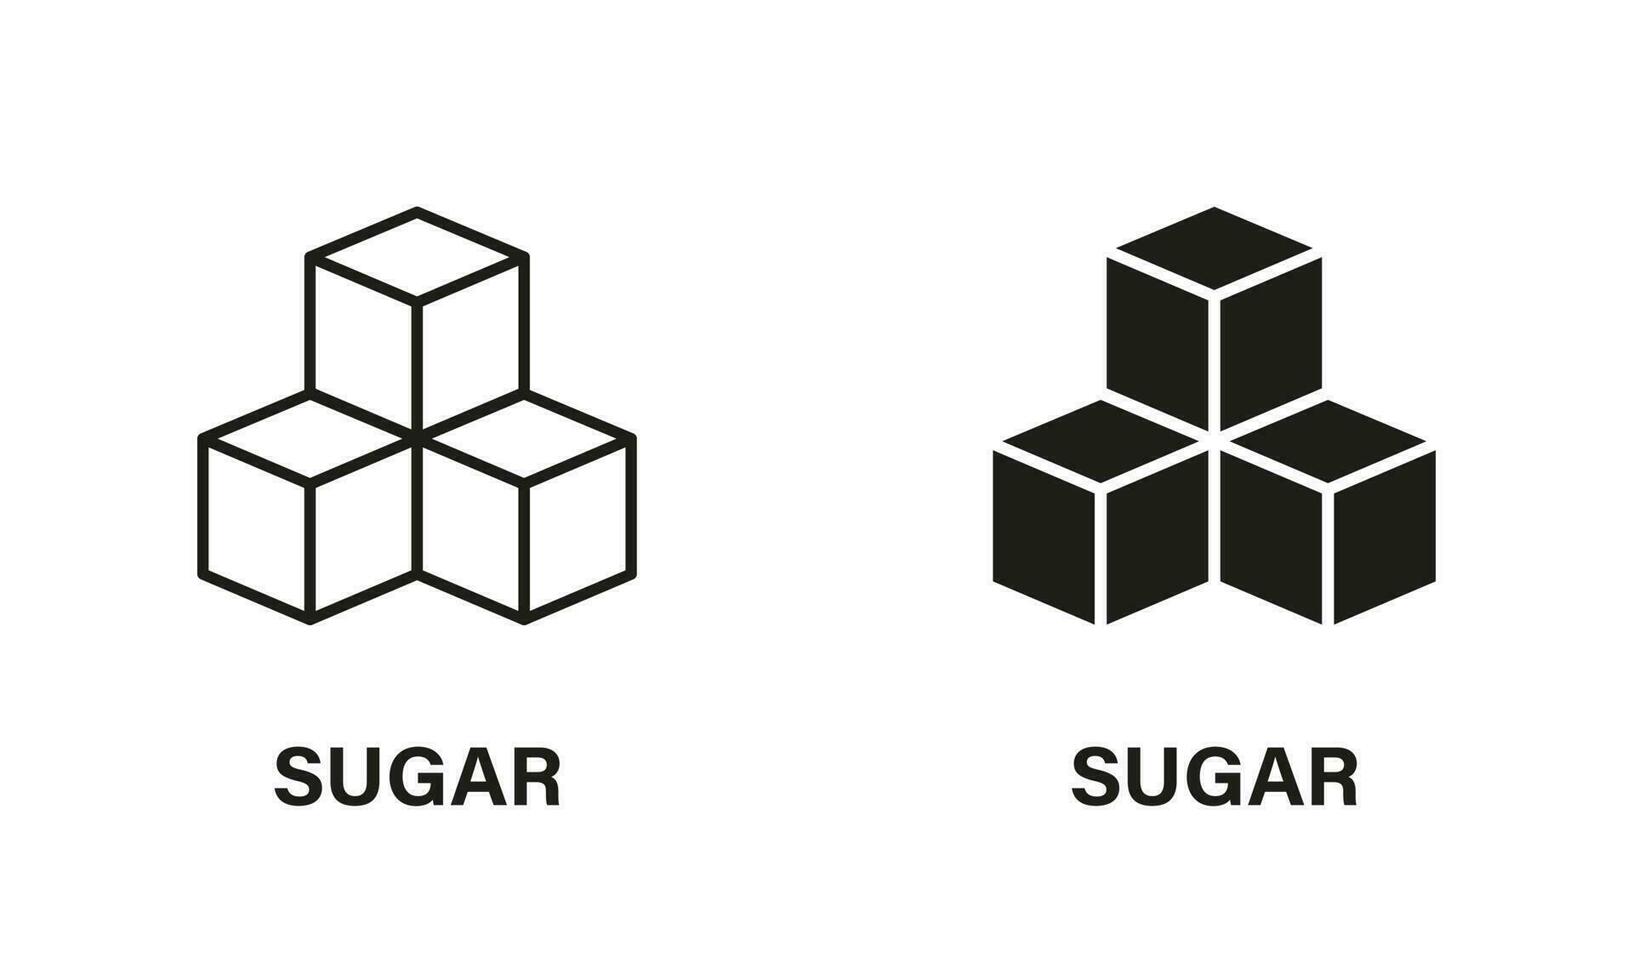 Sugar Cubes Line and Silhouette Icon Set. Low Glucose Black Pictogram. Healthy Sweet Vegan Product Symbol Collection on White Background. Isolated Vector Illustration.